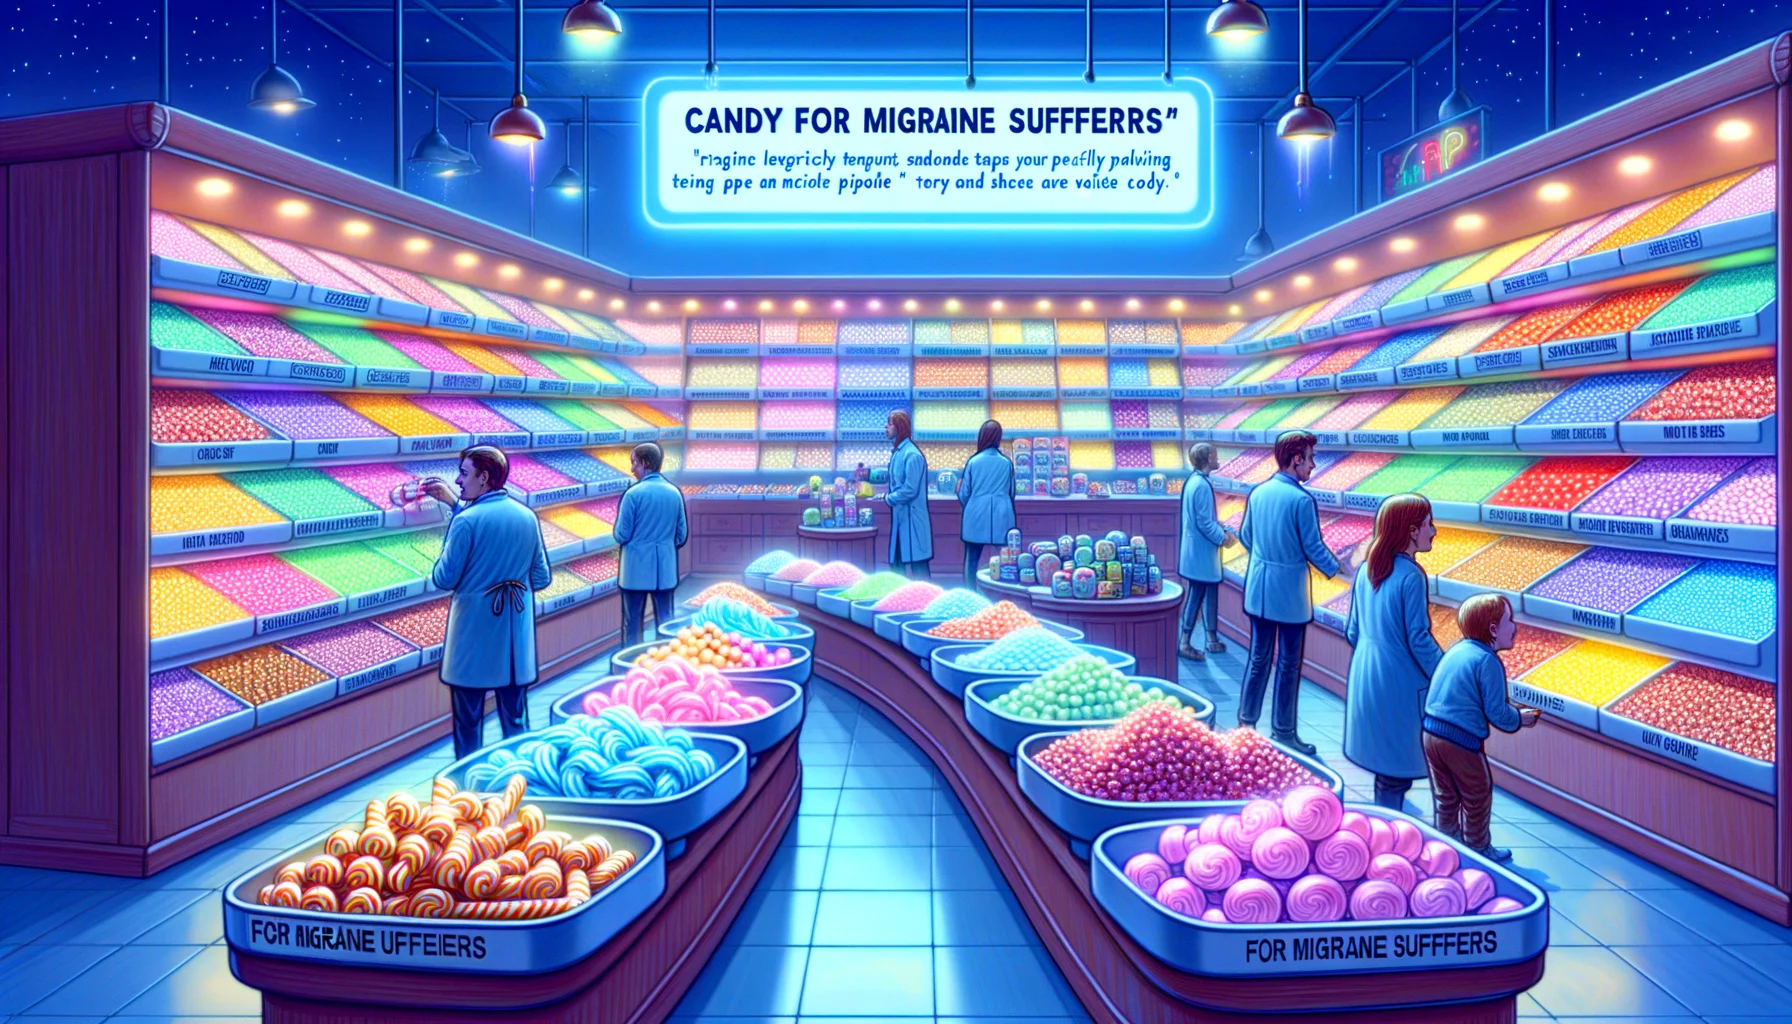 Imagine a humorous, realistic depiction of a perfect scenario for 'Candy for Migraine Sufferers.' Picture a candy shop, overflowing with sweets of all sizes and shapes, radiating in vibrant colors. The focus is on a specially labelled section featuring peculiar types of candy canes, gummy bears, jelly beans, and lollipops, all marked as 'For Migraine Sufferers.' These candies are emitting a soothing, calming glow of soft blue and purple hues, in contrast to the brightly colored surrounding candies. A few customers are browsing, each with a lighthearted smile on their faces, eager to try these unique confections.